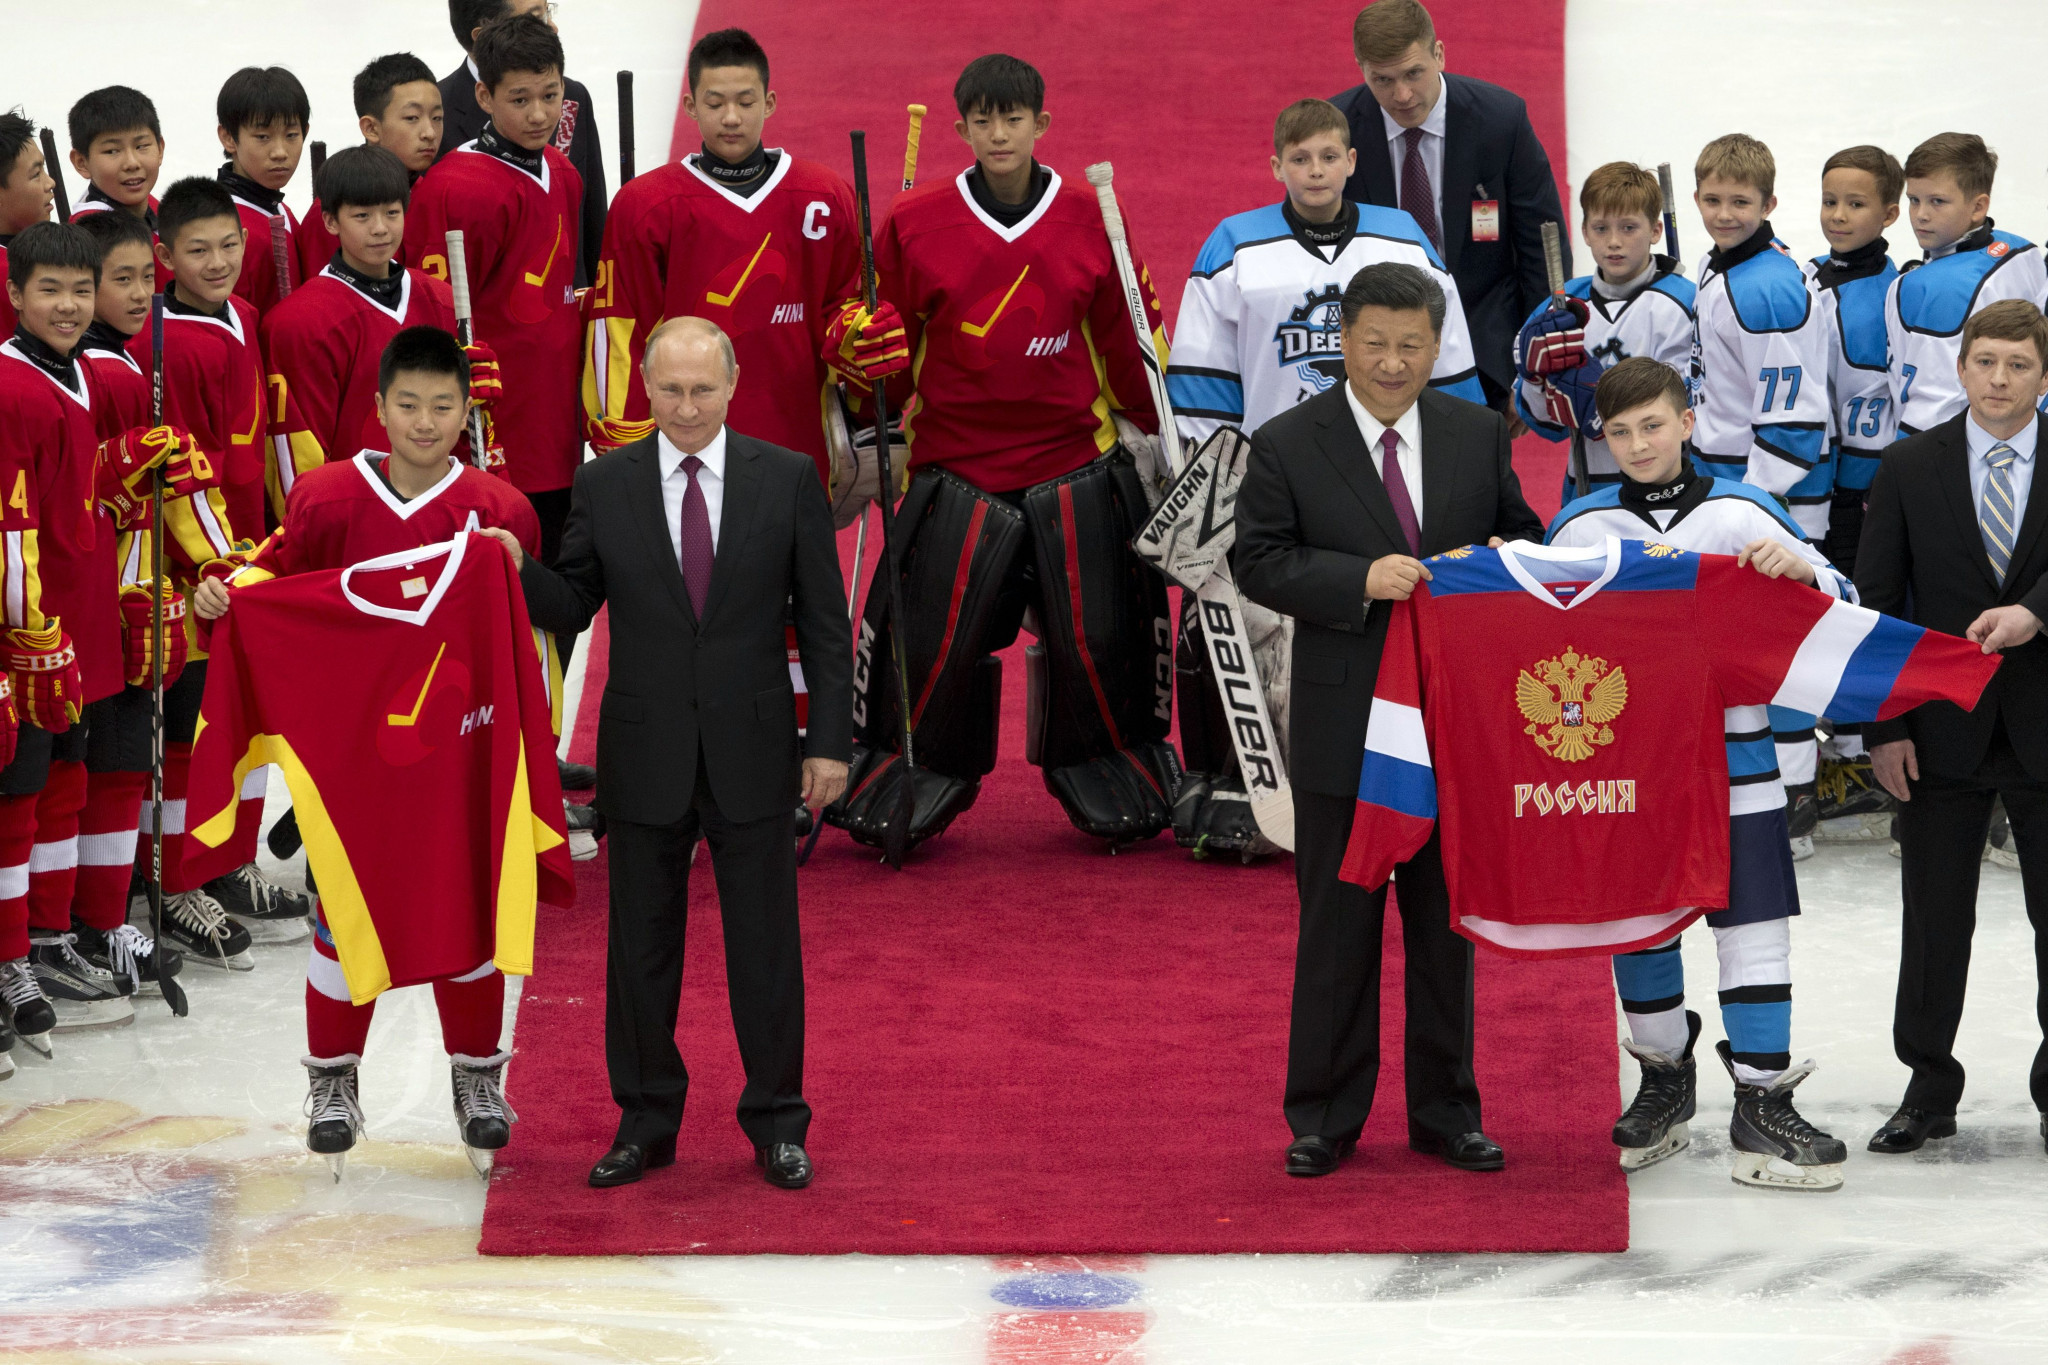 Putin hails China as "fast learner" with country striving for ice hockey development prior to Beijing 2022